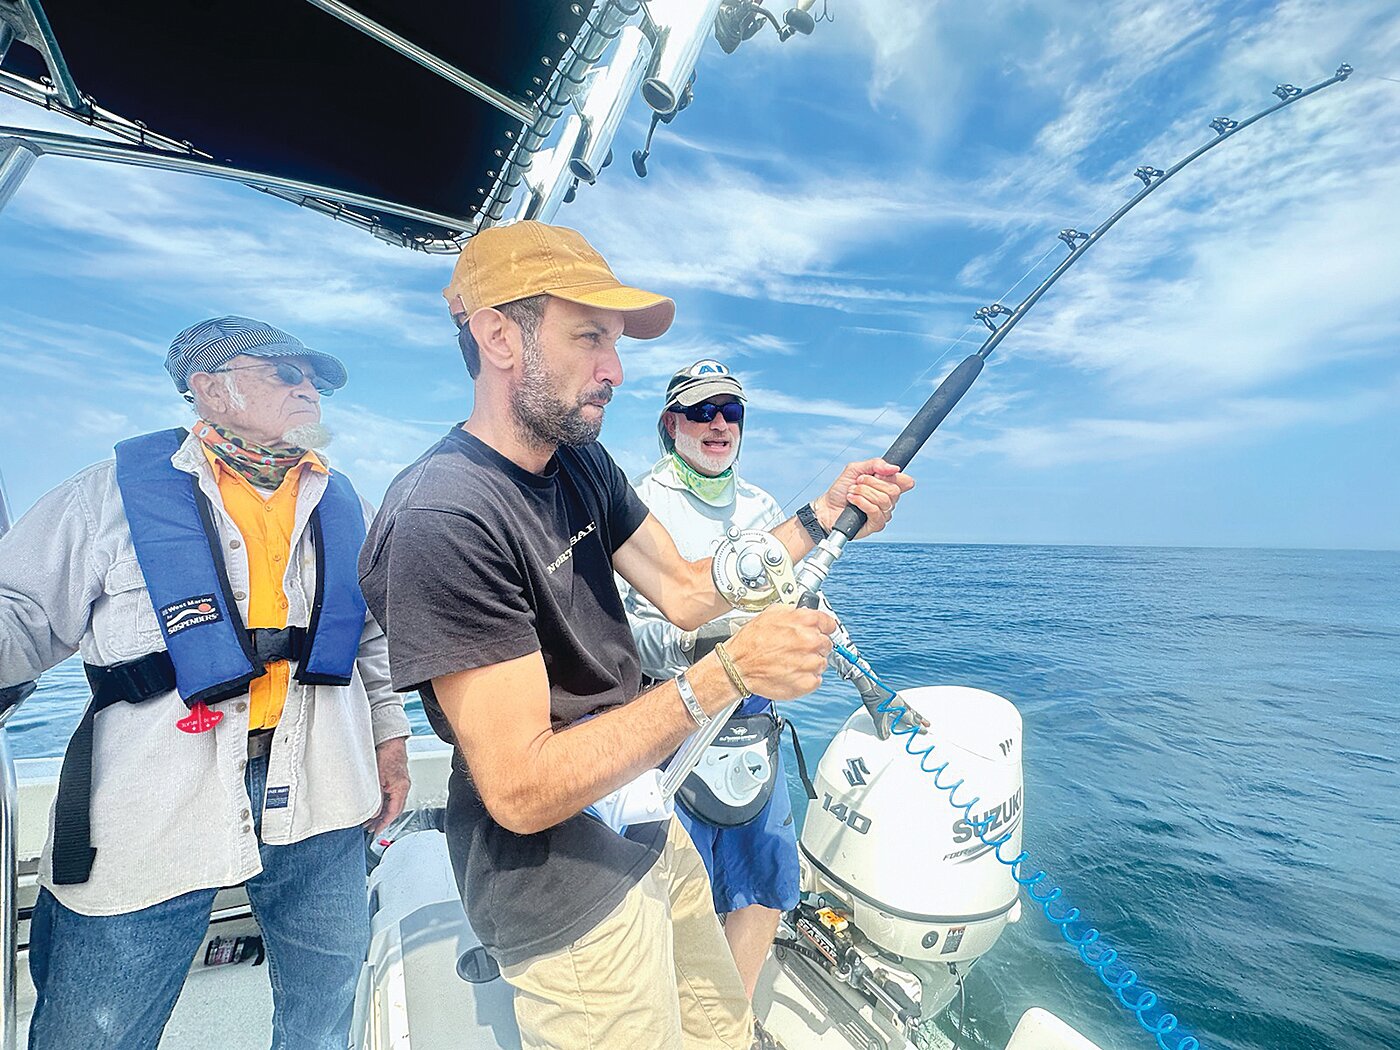 Greg Vespe at the stern, with his father Ric Vespe at the helm, as cousin Stephano Leoni reels in a thresher shark. Greg’s son Shawn Hayes Costello was also part of the crew.